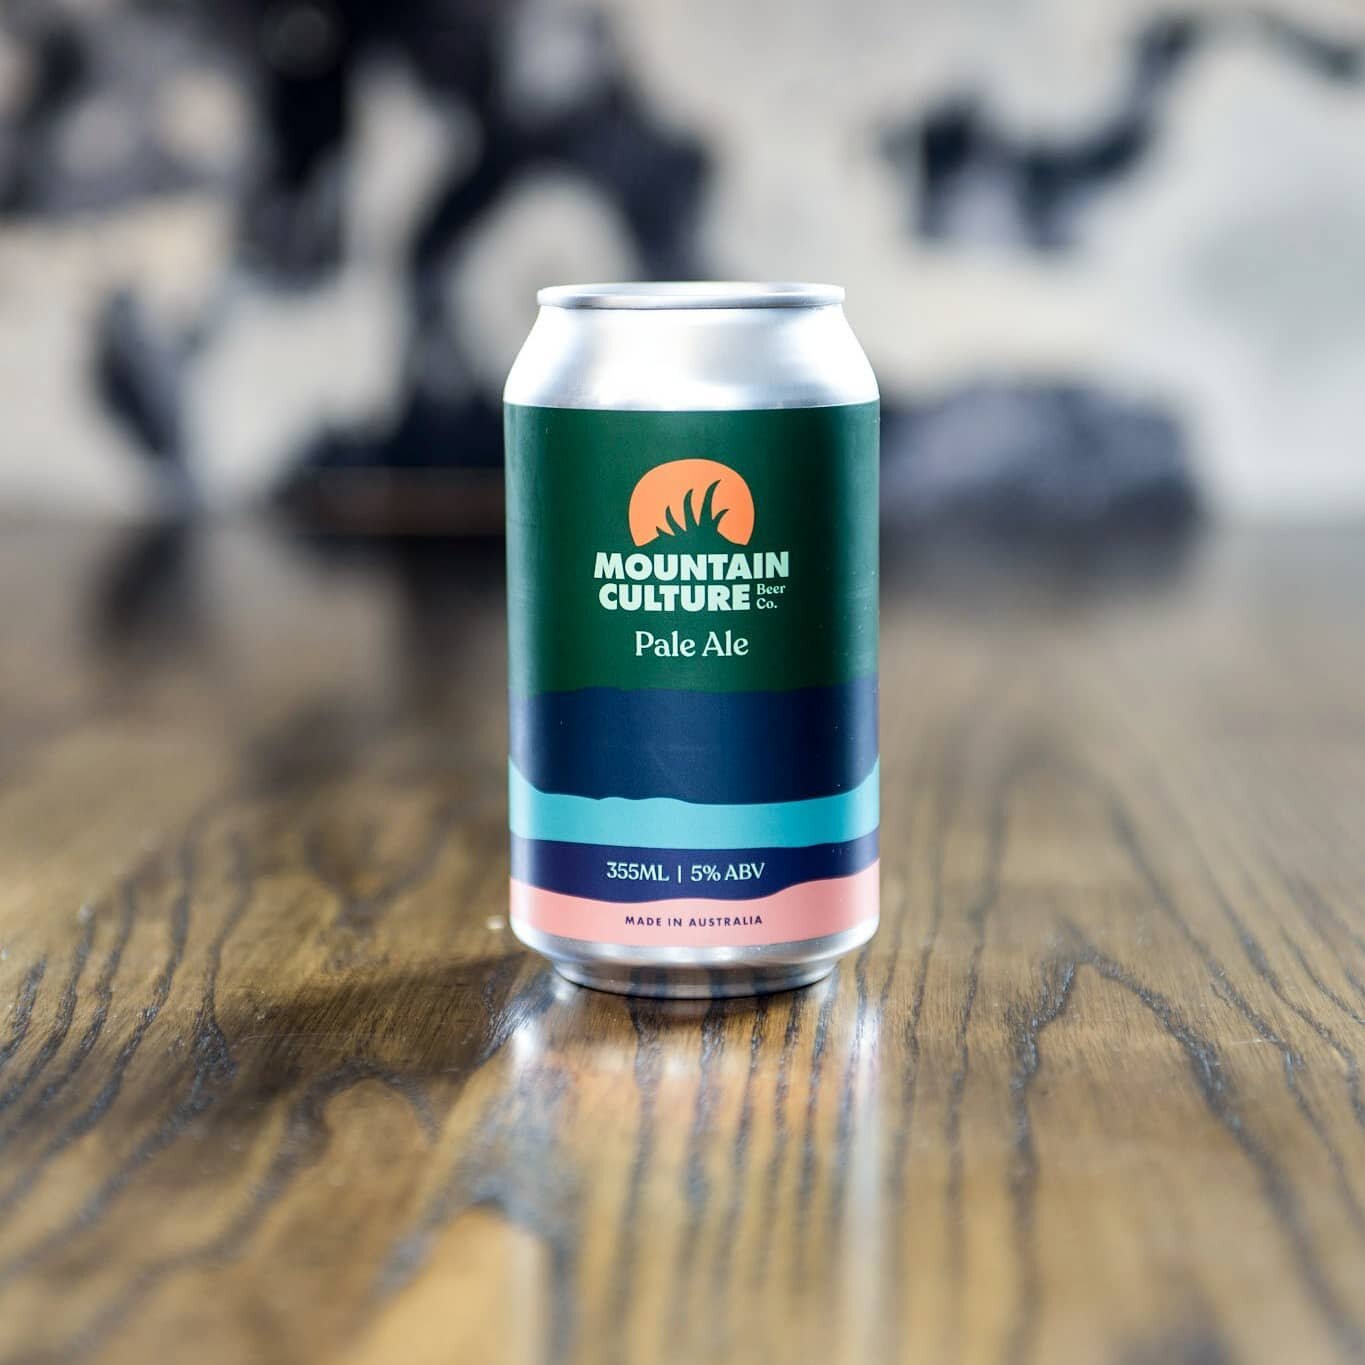 Quality drop from @mountainculturebeerco 
📸 For the @oddculturebar online store
📷 Bolt Photography ⚡